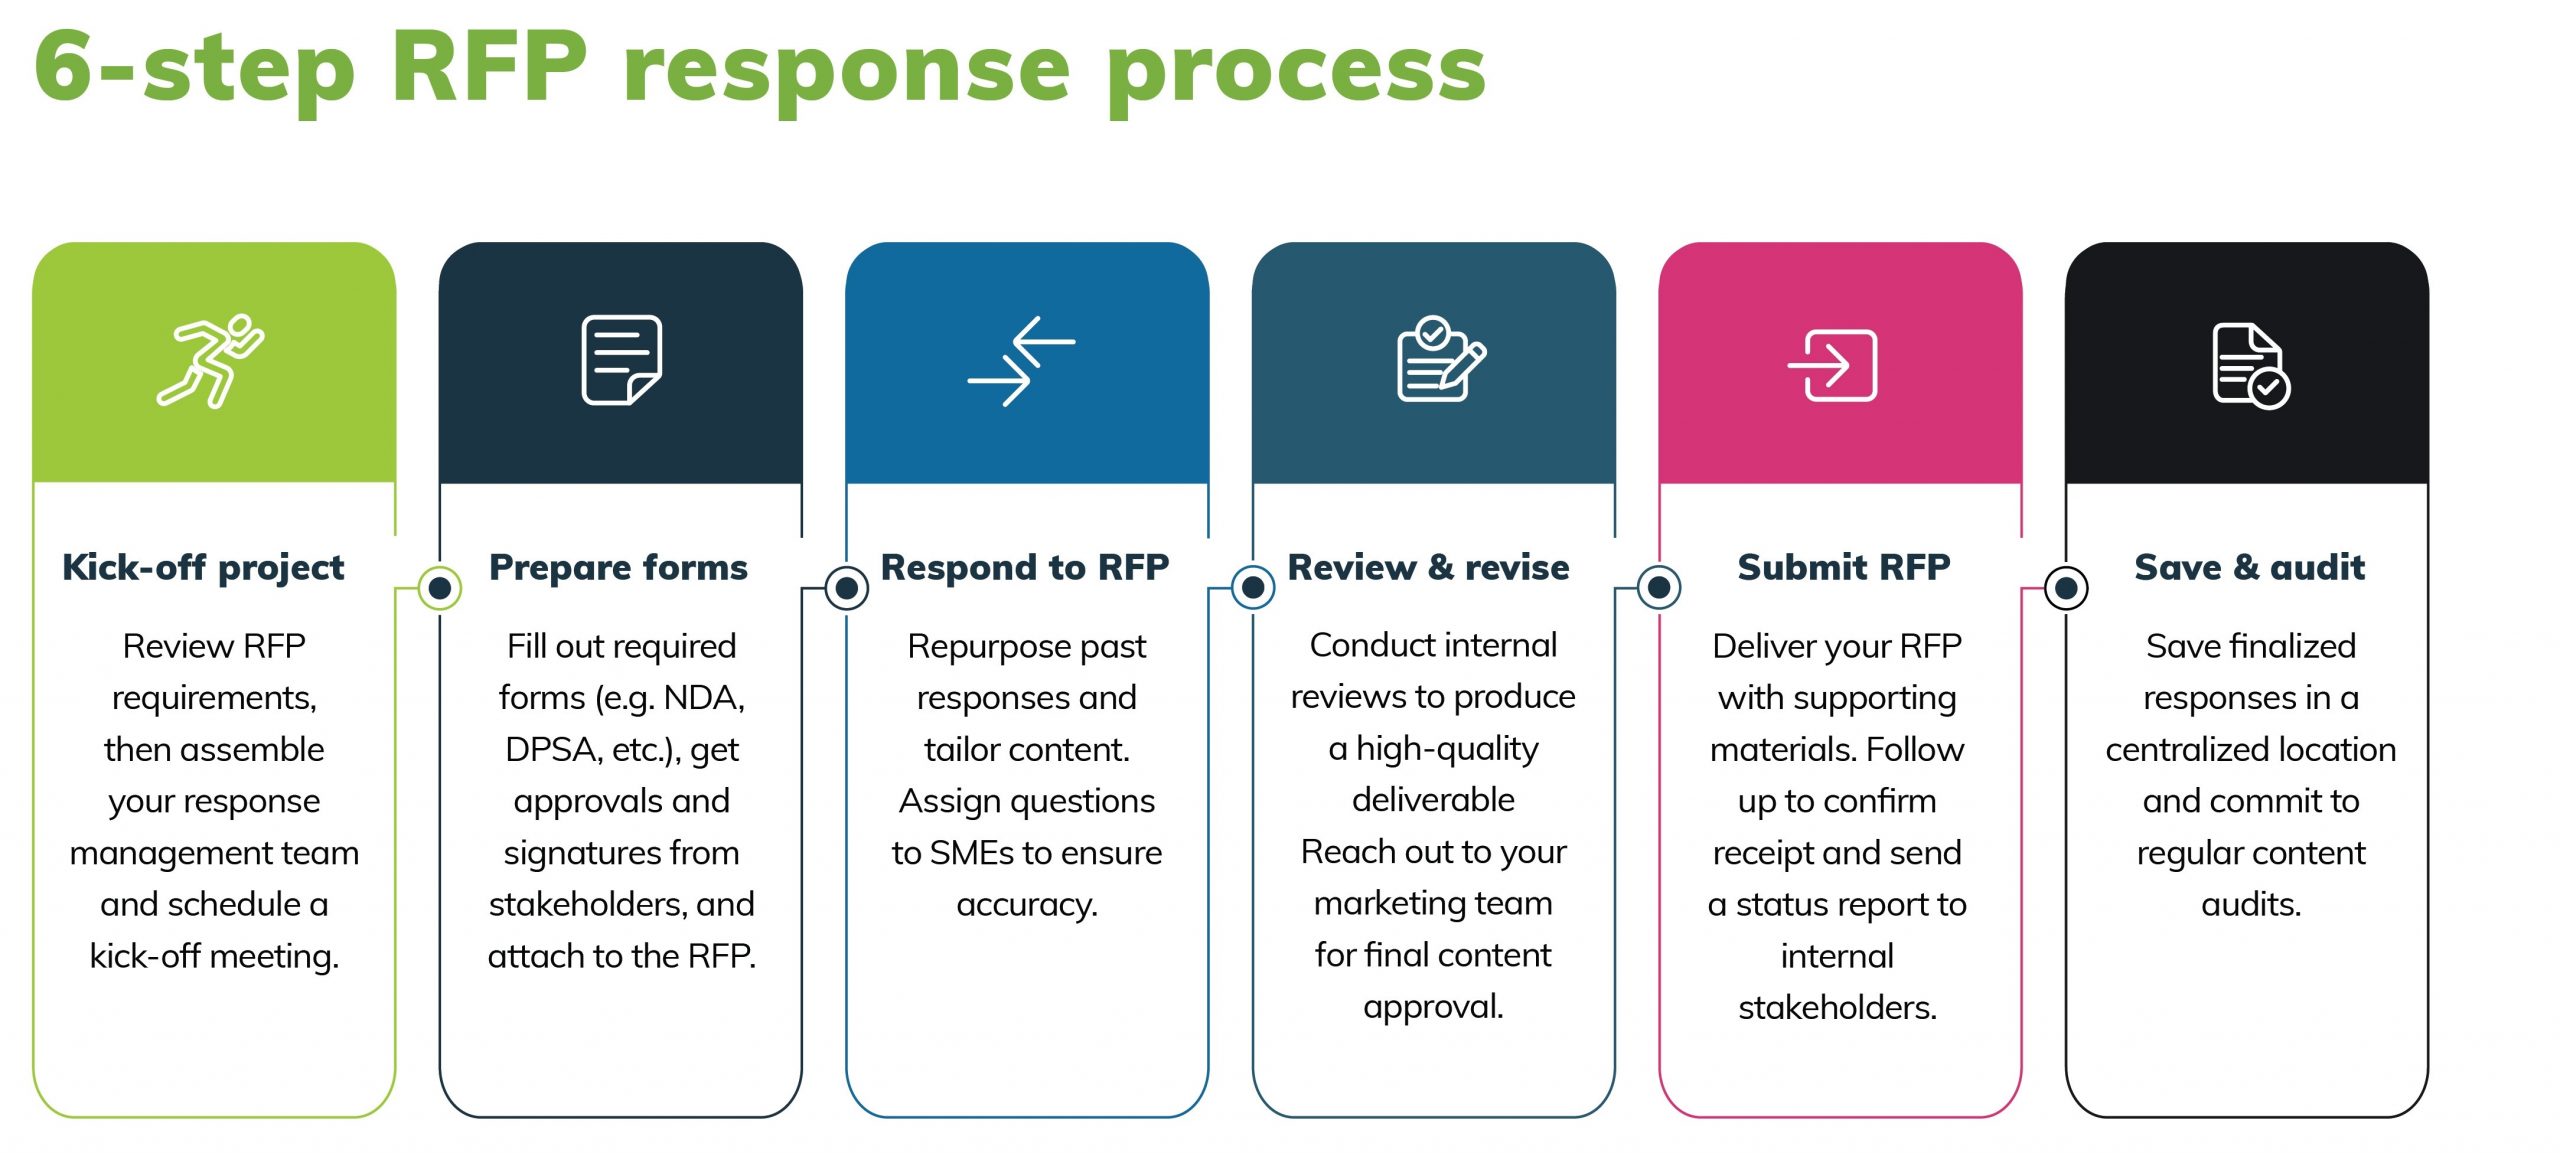 How to Create a Great RFP Response Process